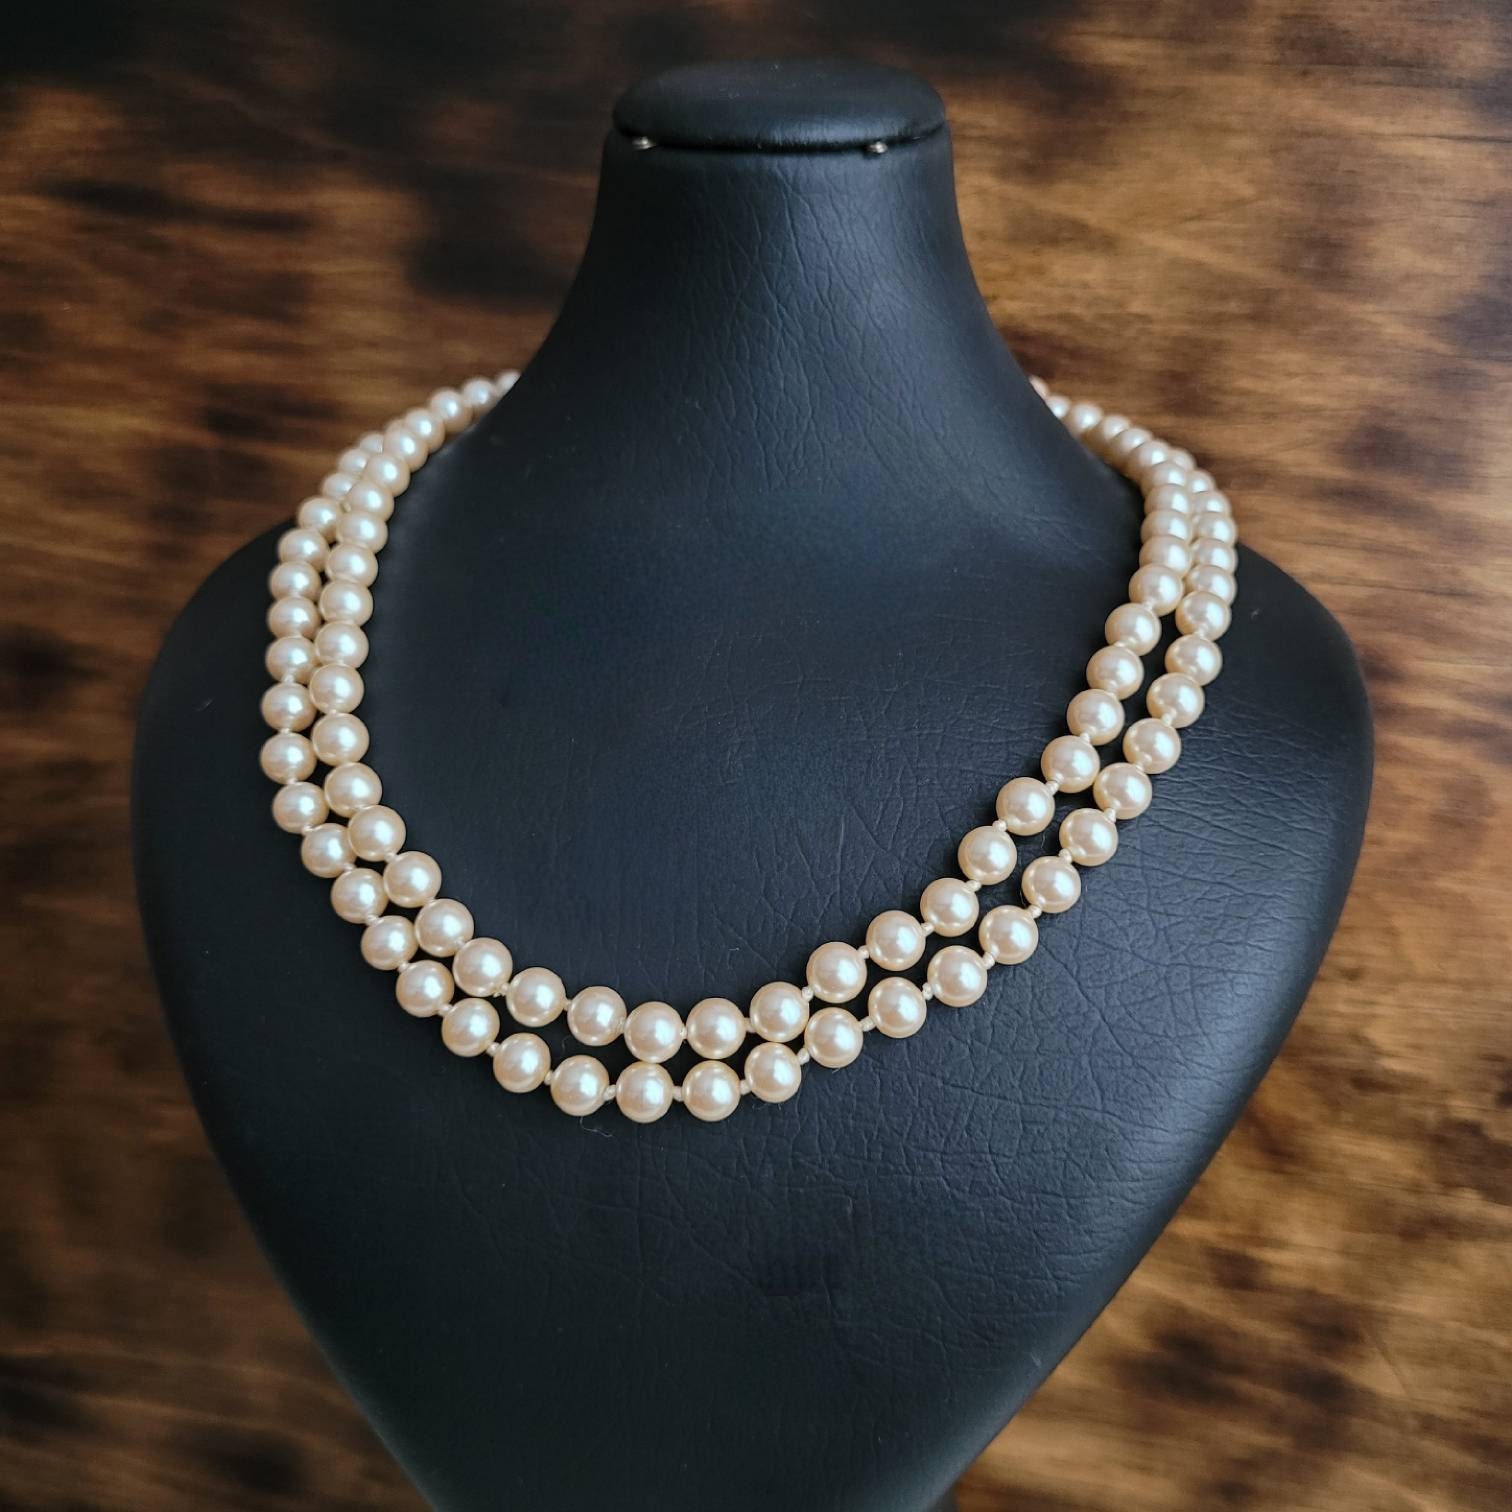 Richelieu Oversized Pearl Necklace Beaded Necklace Signed Vintage Costume  Jewelry Large Faux Pearl Beads Gold Tone Accents